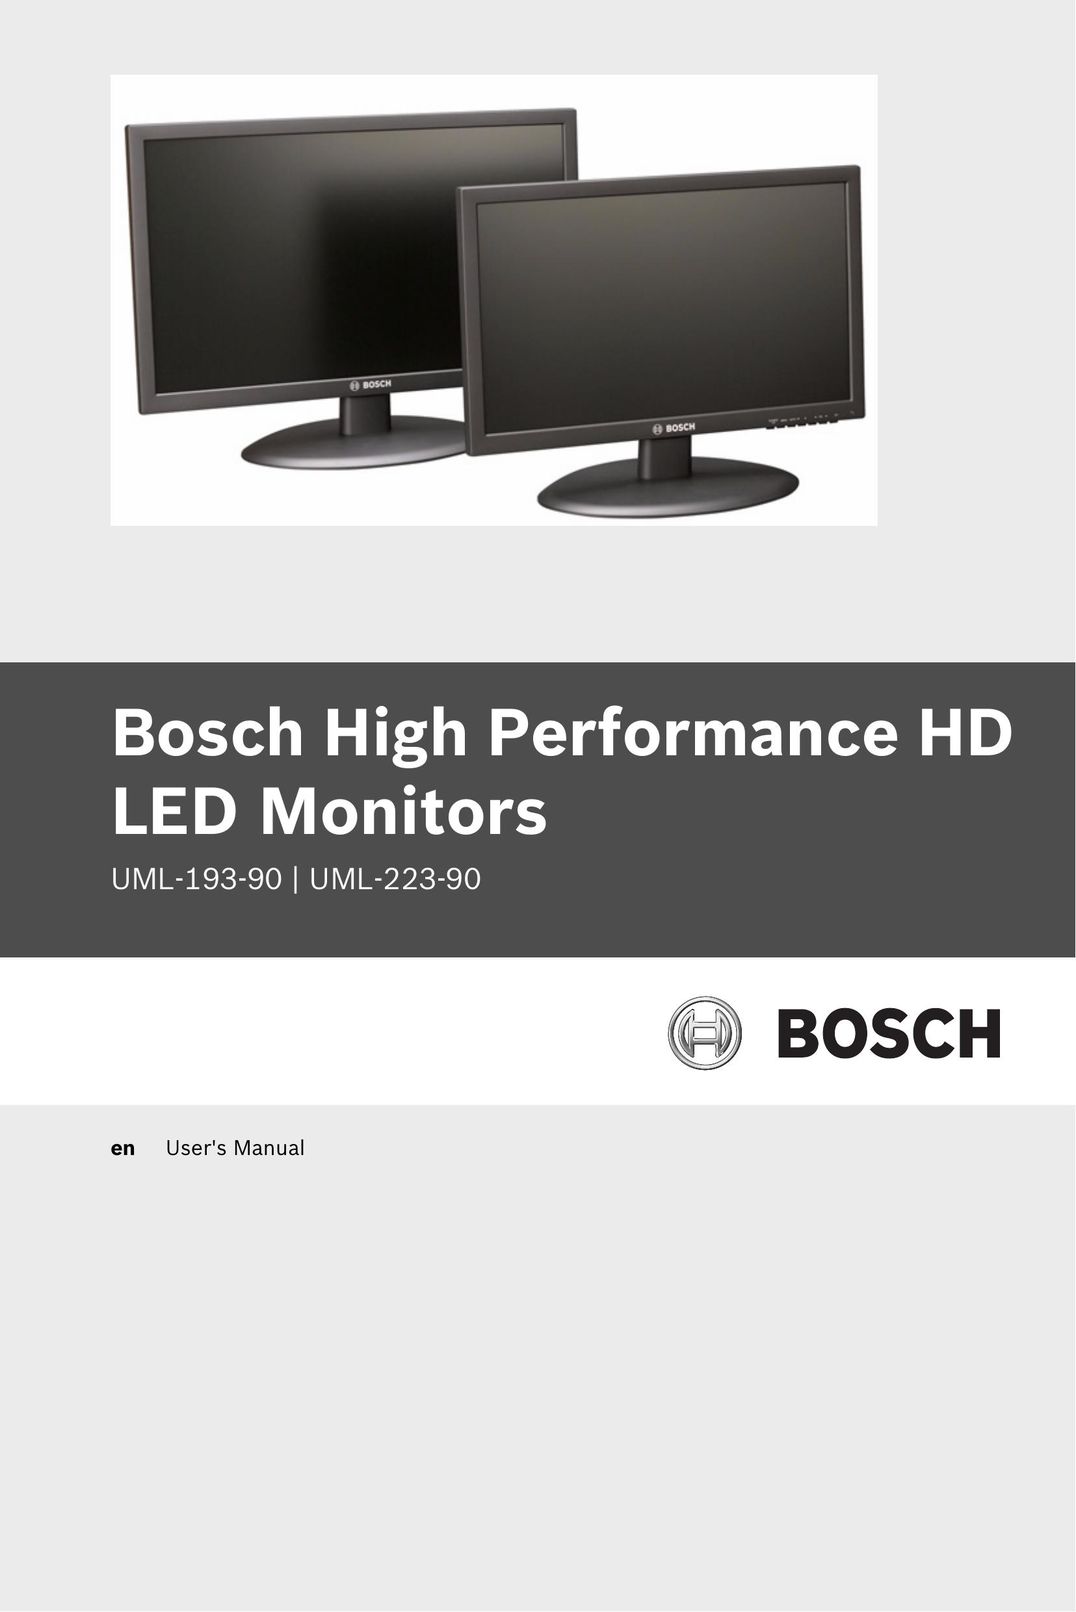 Bosch Appliances UML-193-90 Computer Monitor User Manual (Page 1)